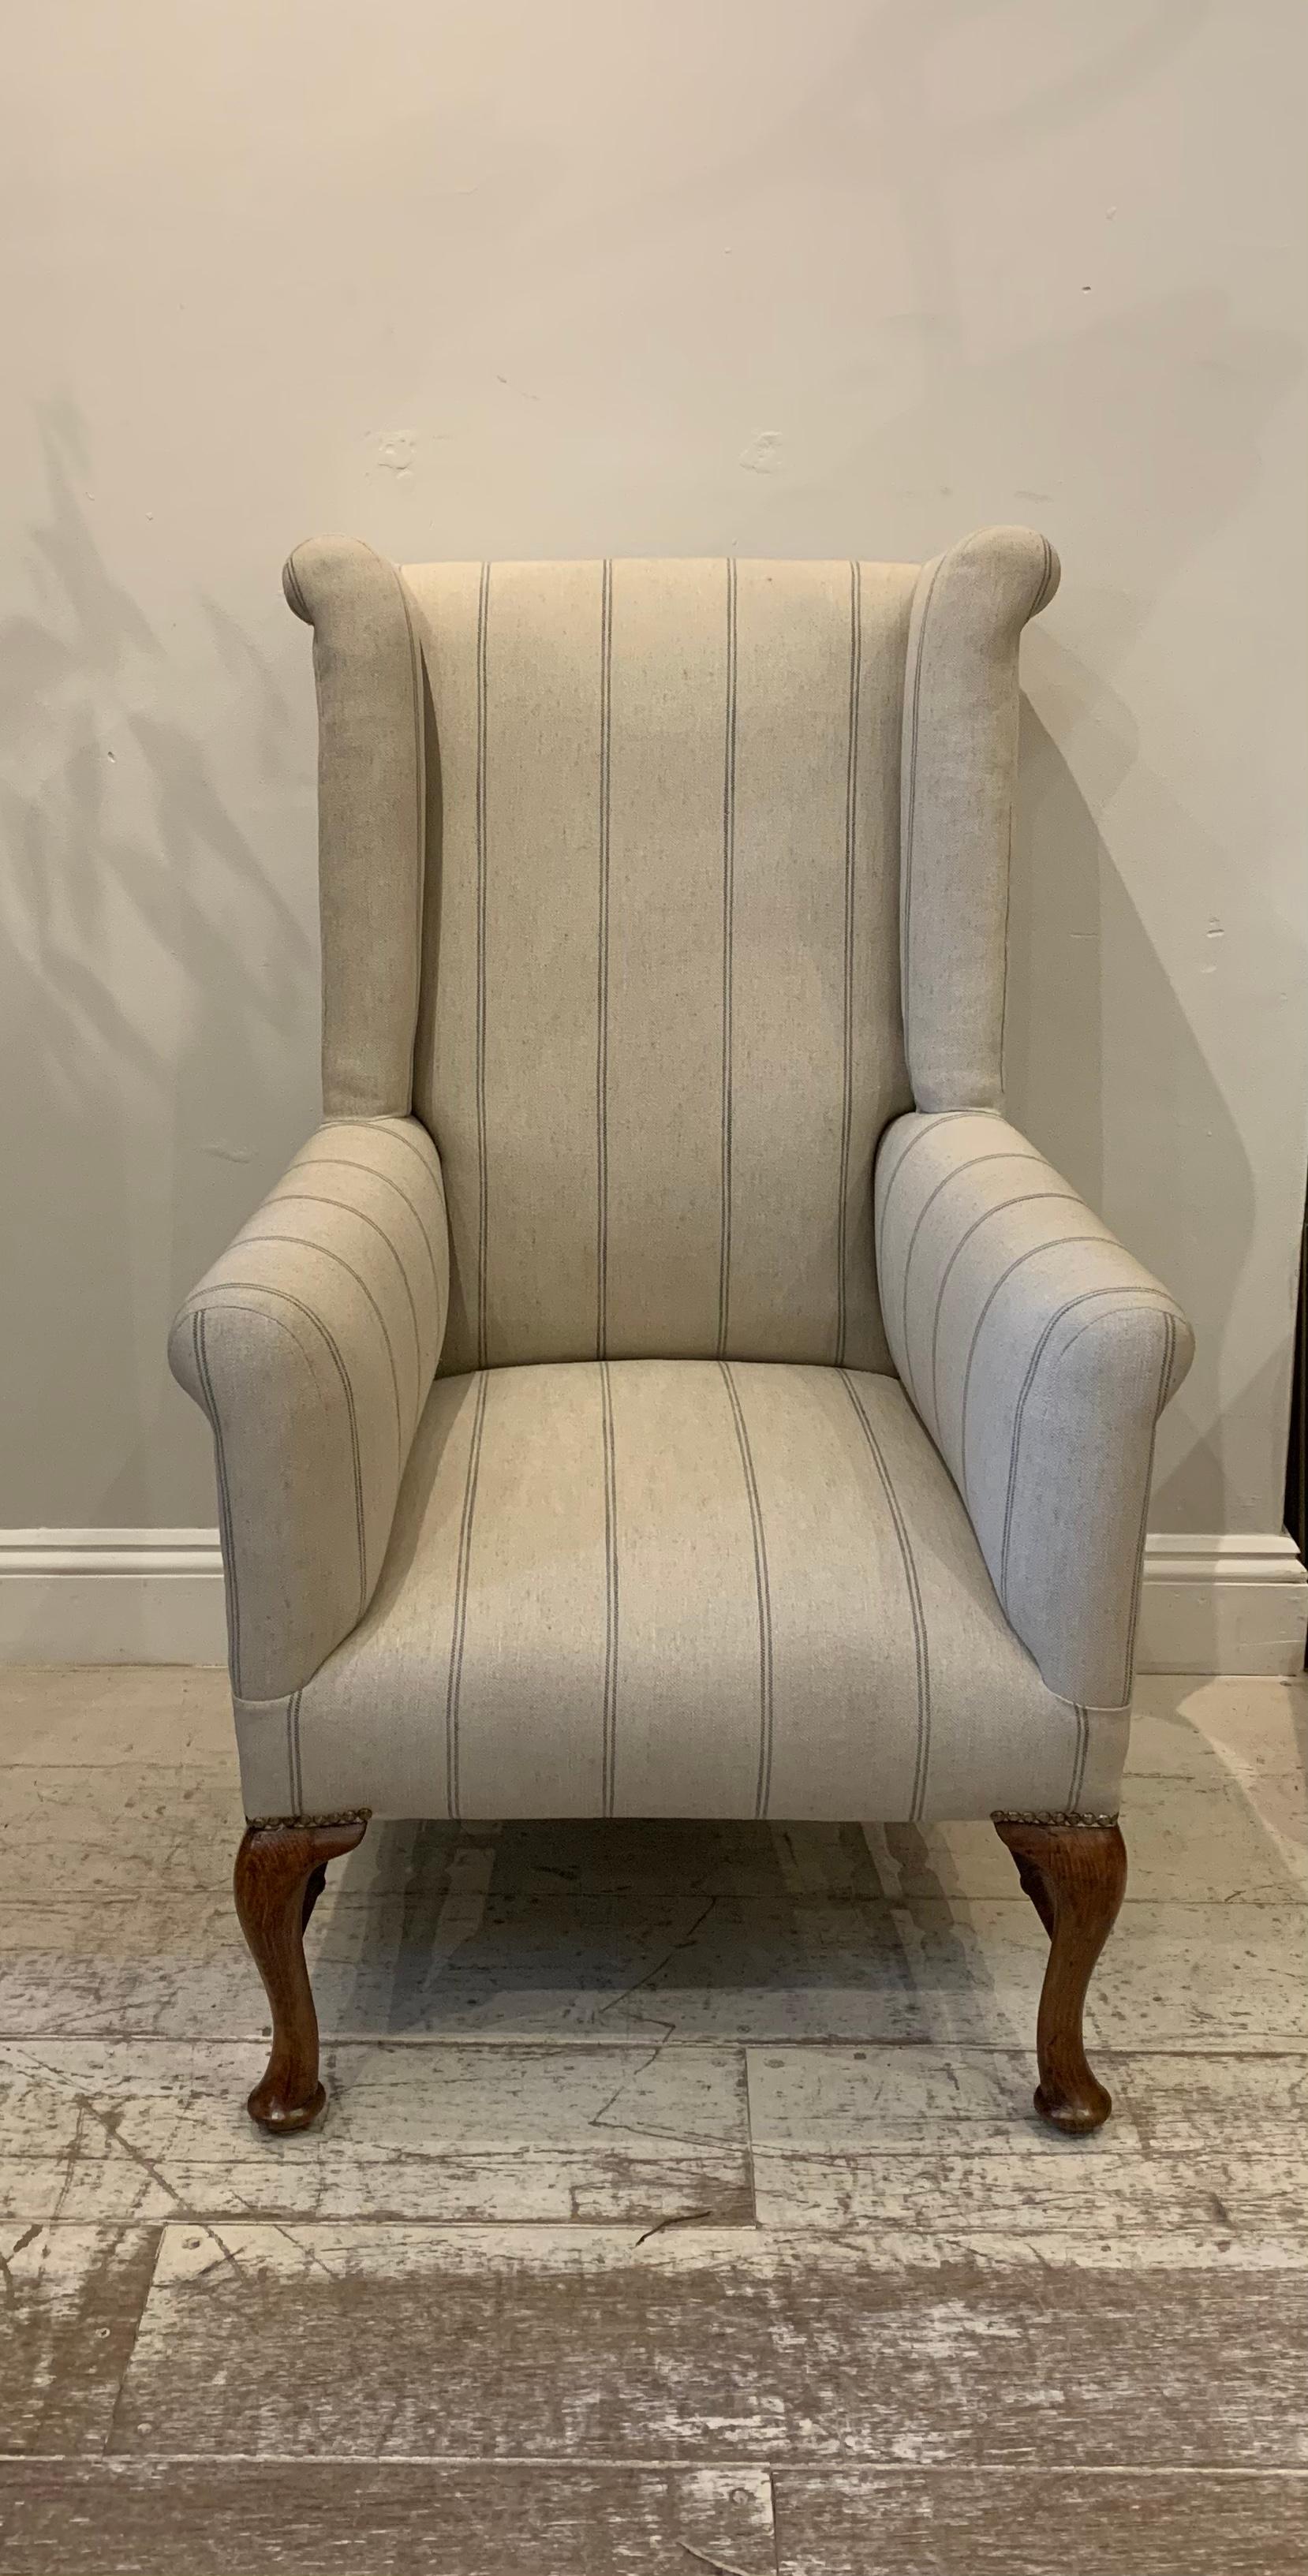 A useful and compact wingback armchair. Circa 1900s and most likely to be English. The armchair has recently been reupholstered in a neutral linen with a fire retardant fabric with blue ticking style stripe running vertically down it.

The legs